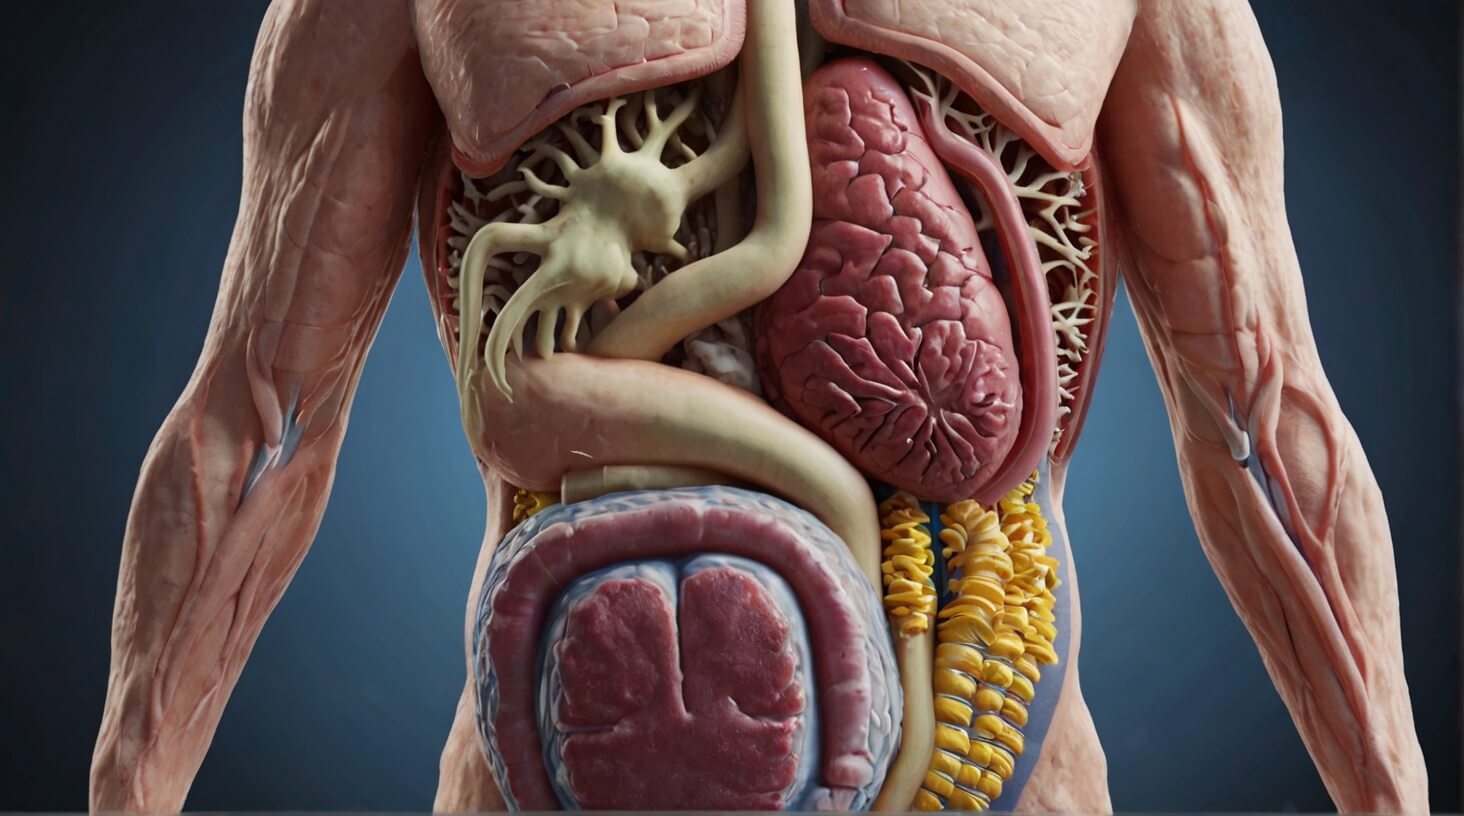 Illustration depicting the intricate relationship and significance of the gut microbiome in human health and wellness.